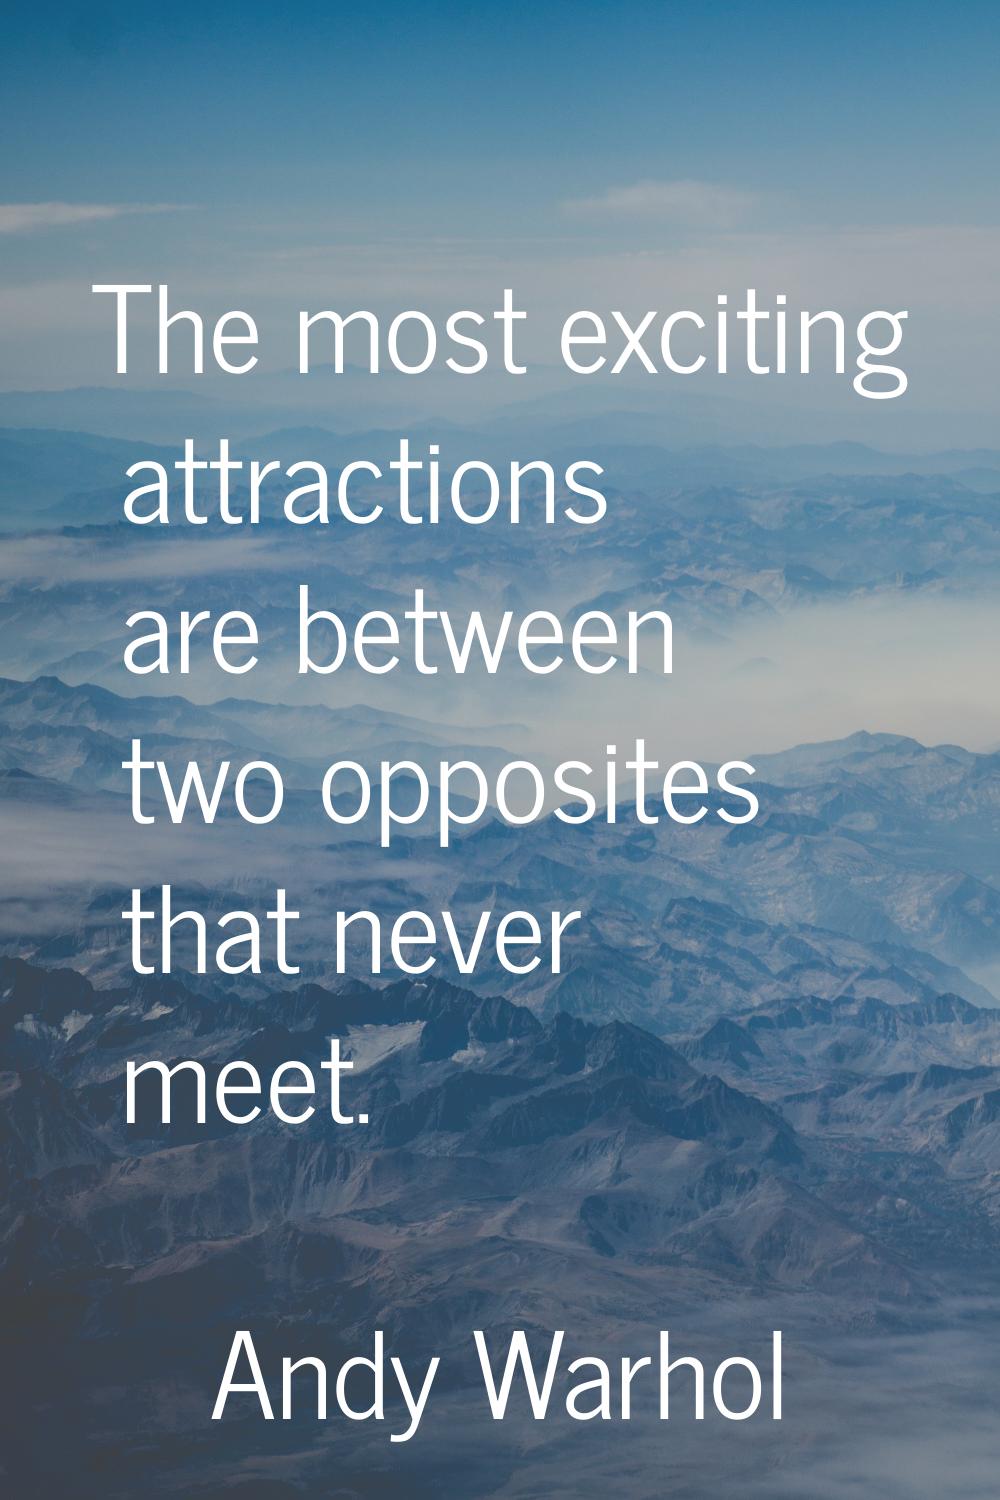 The most exciting attractions are between two opposites that never meet.